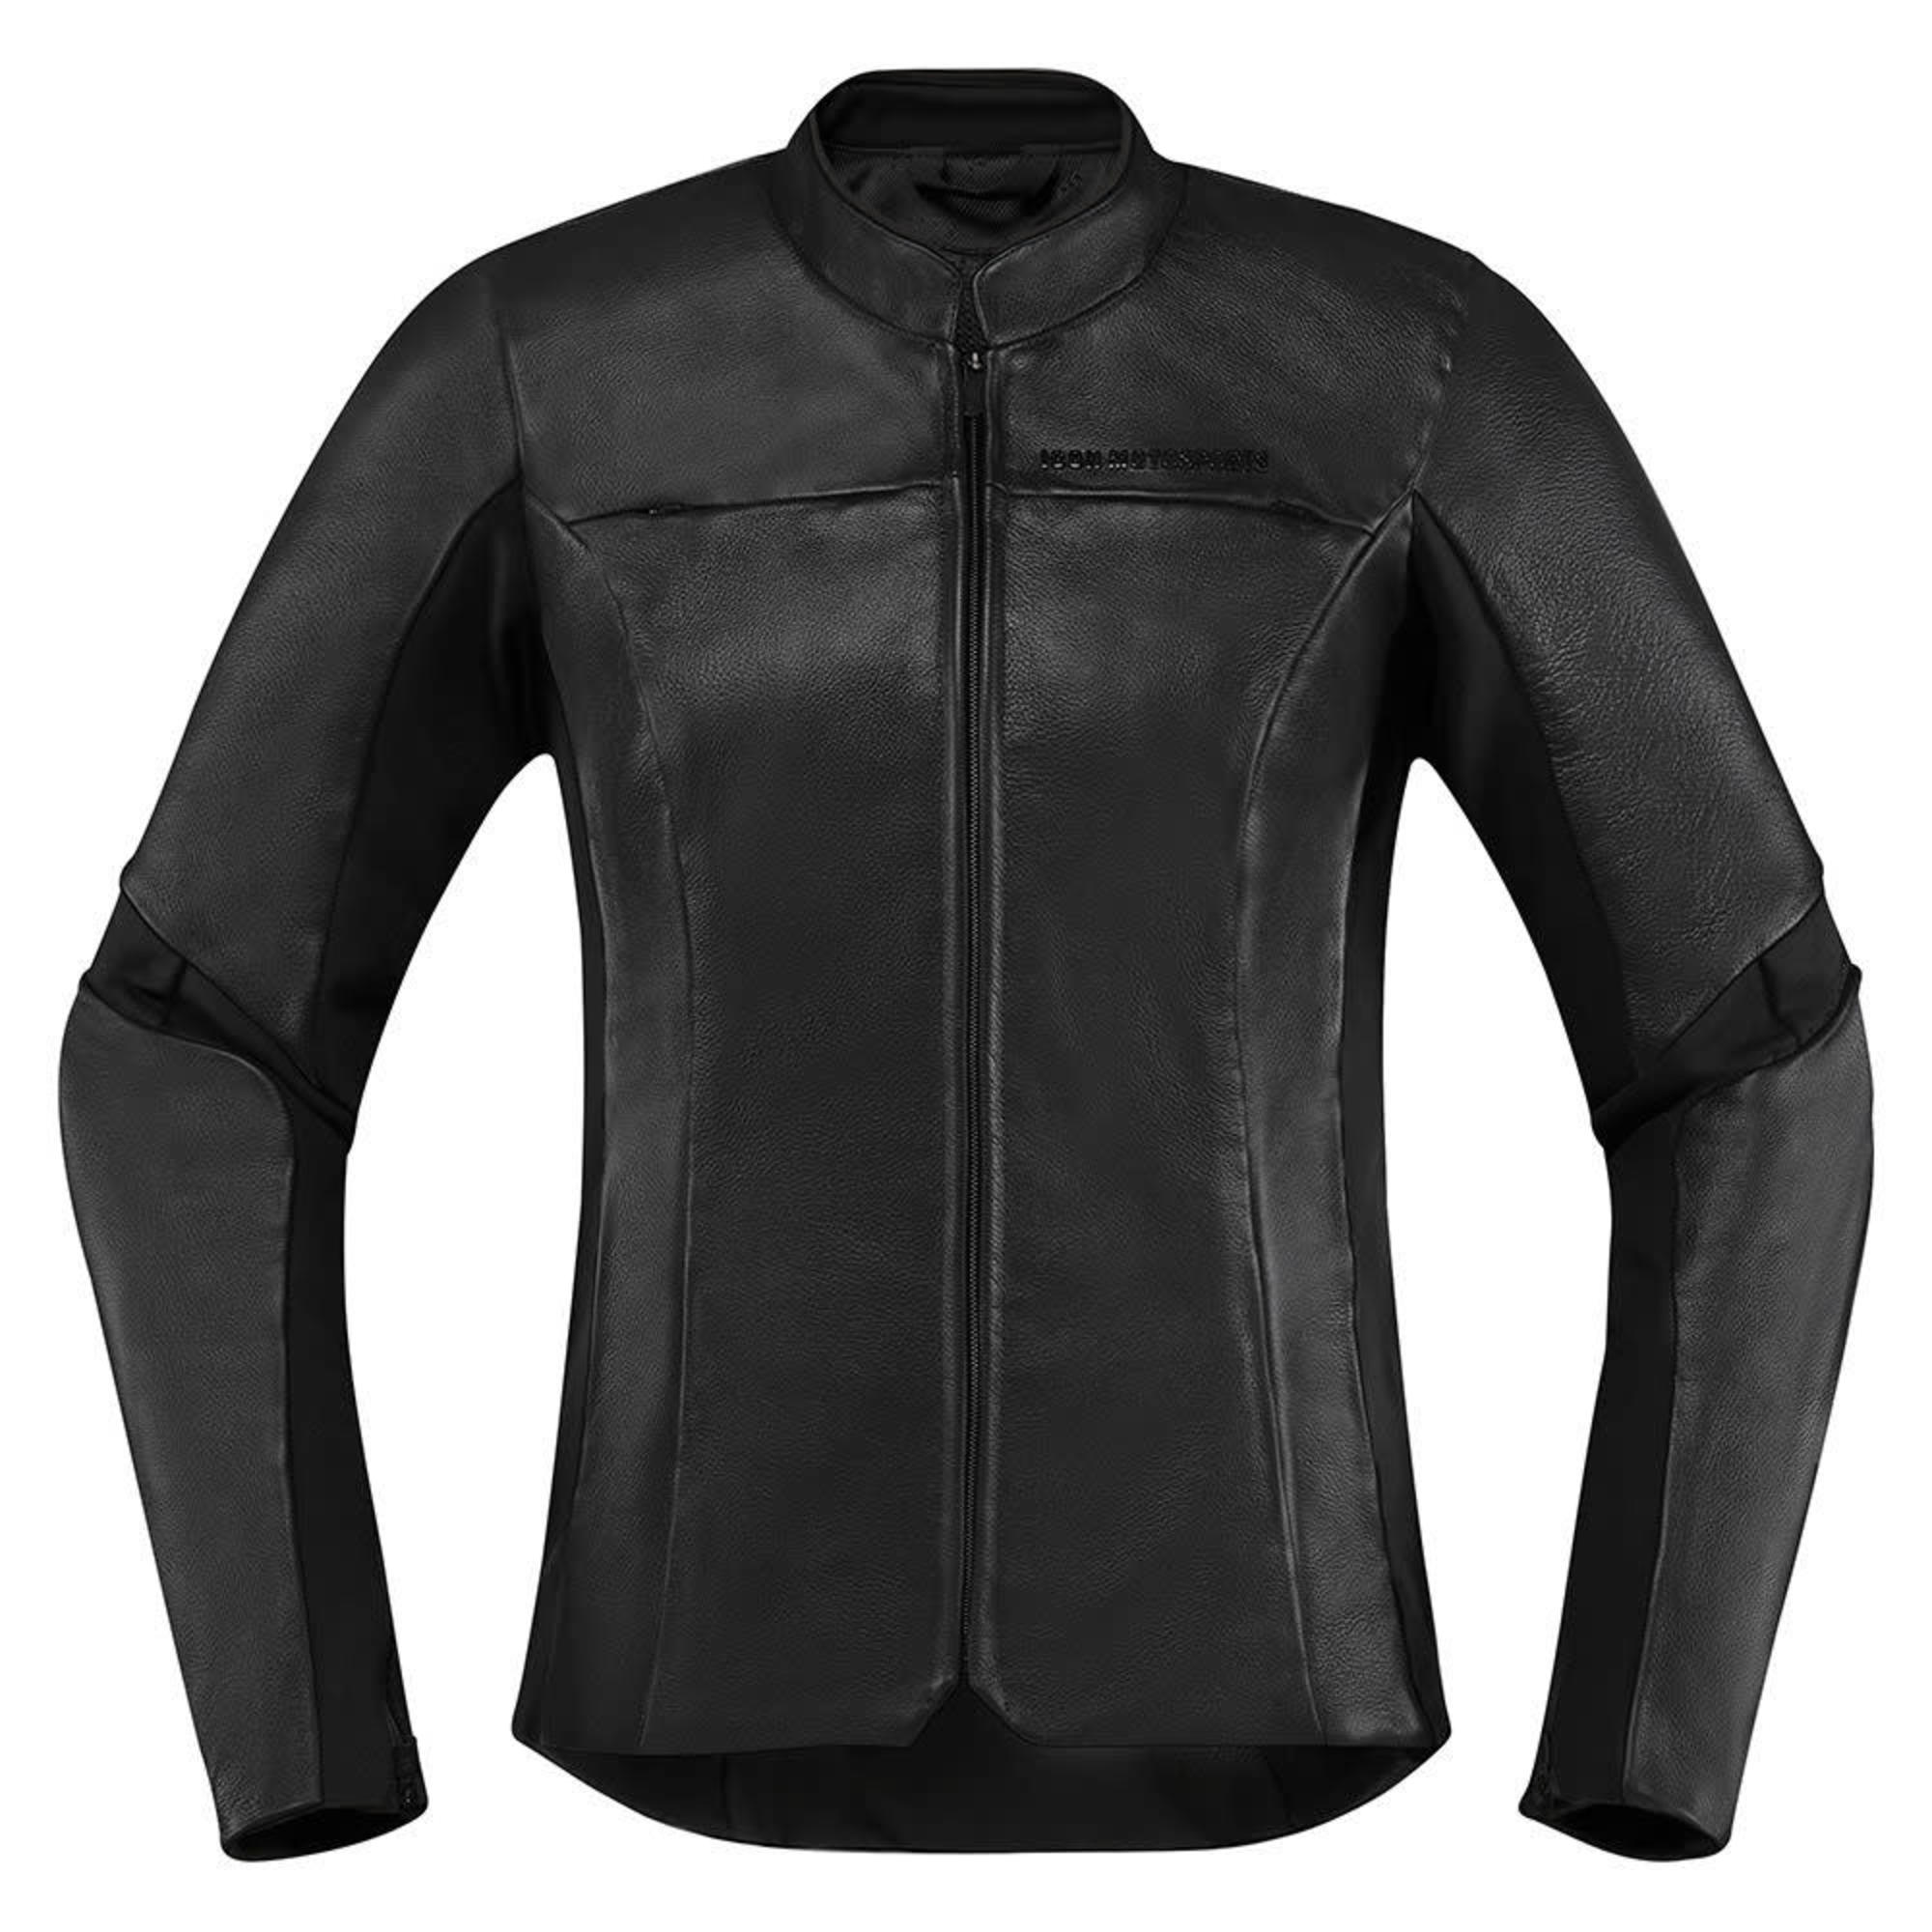 icon leather jackets jacket for womens overlord ce